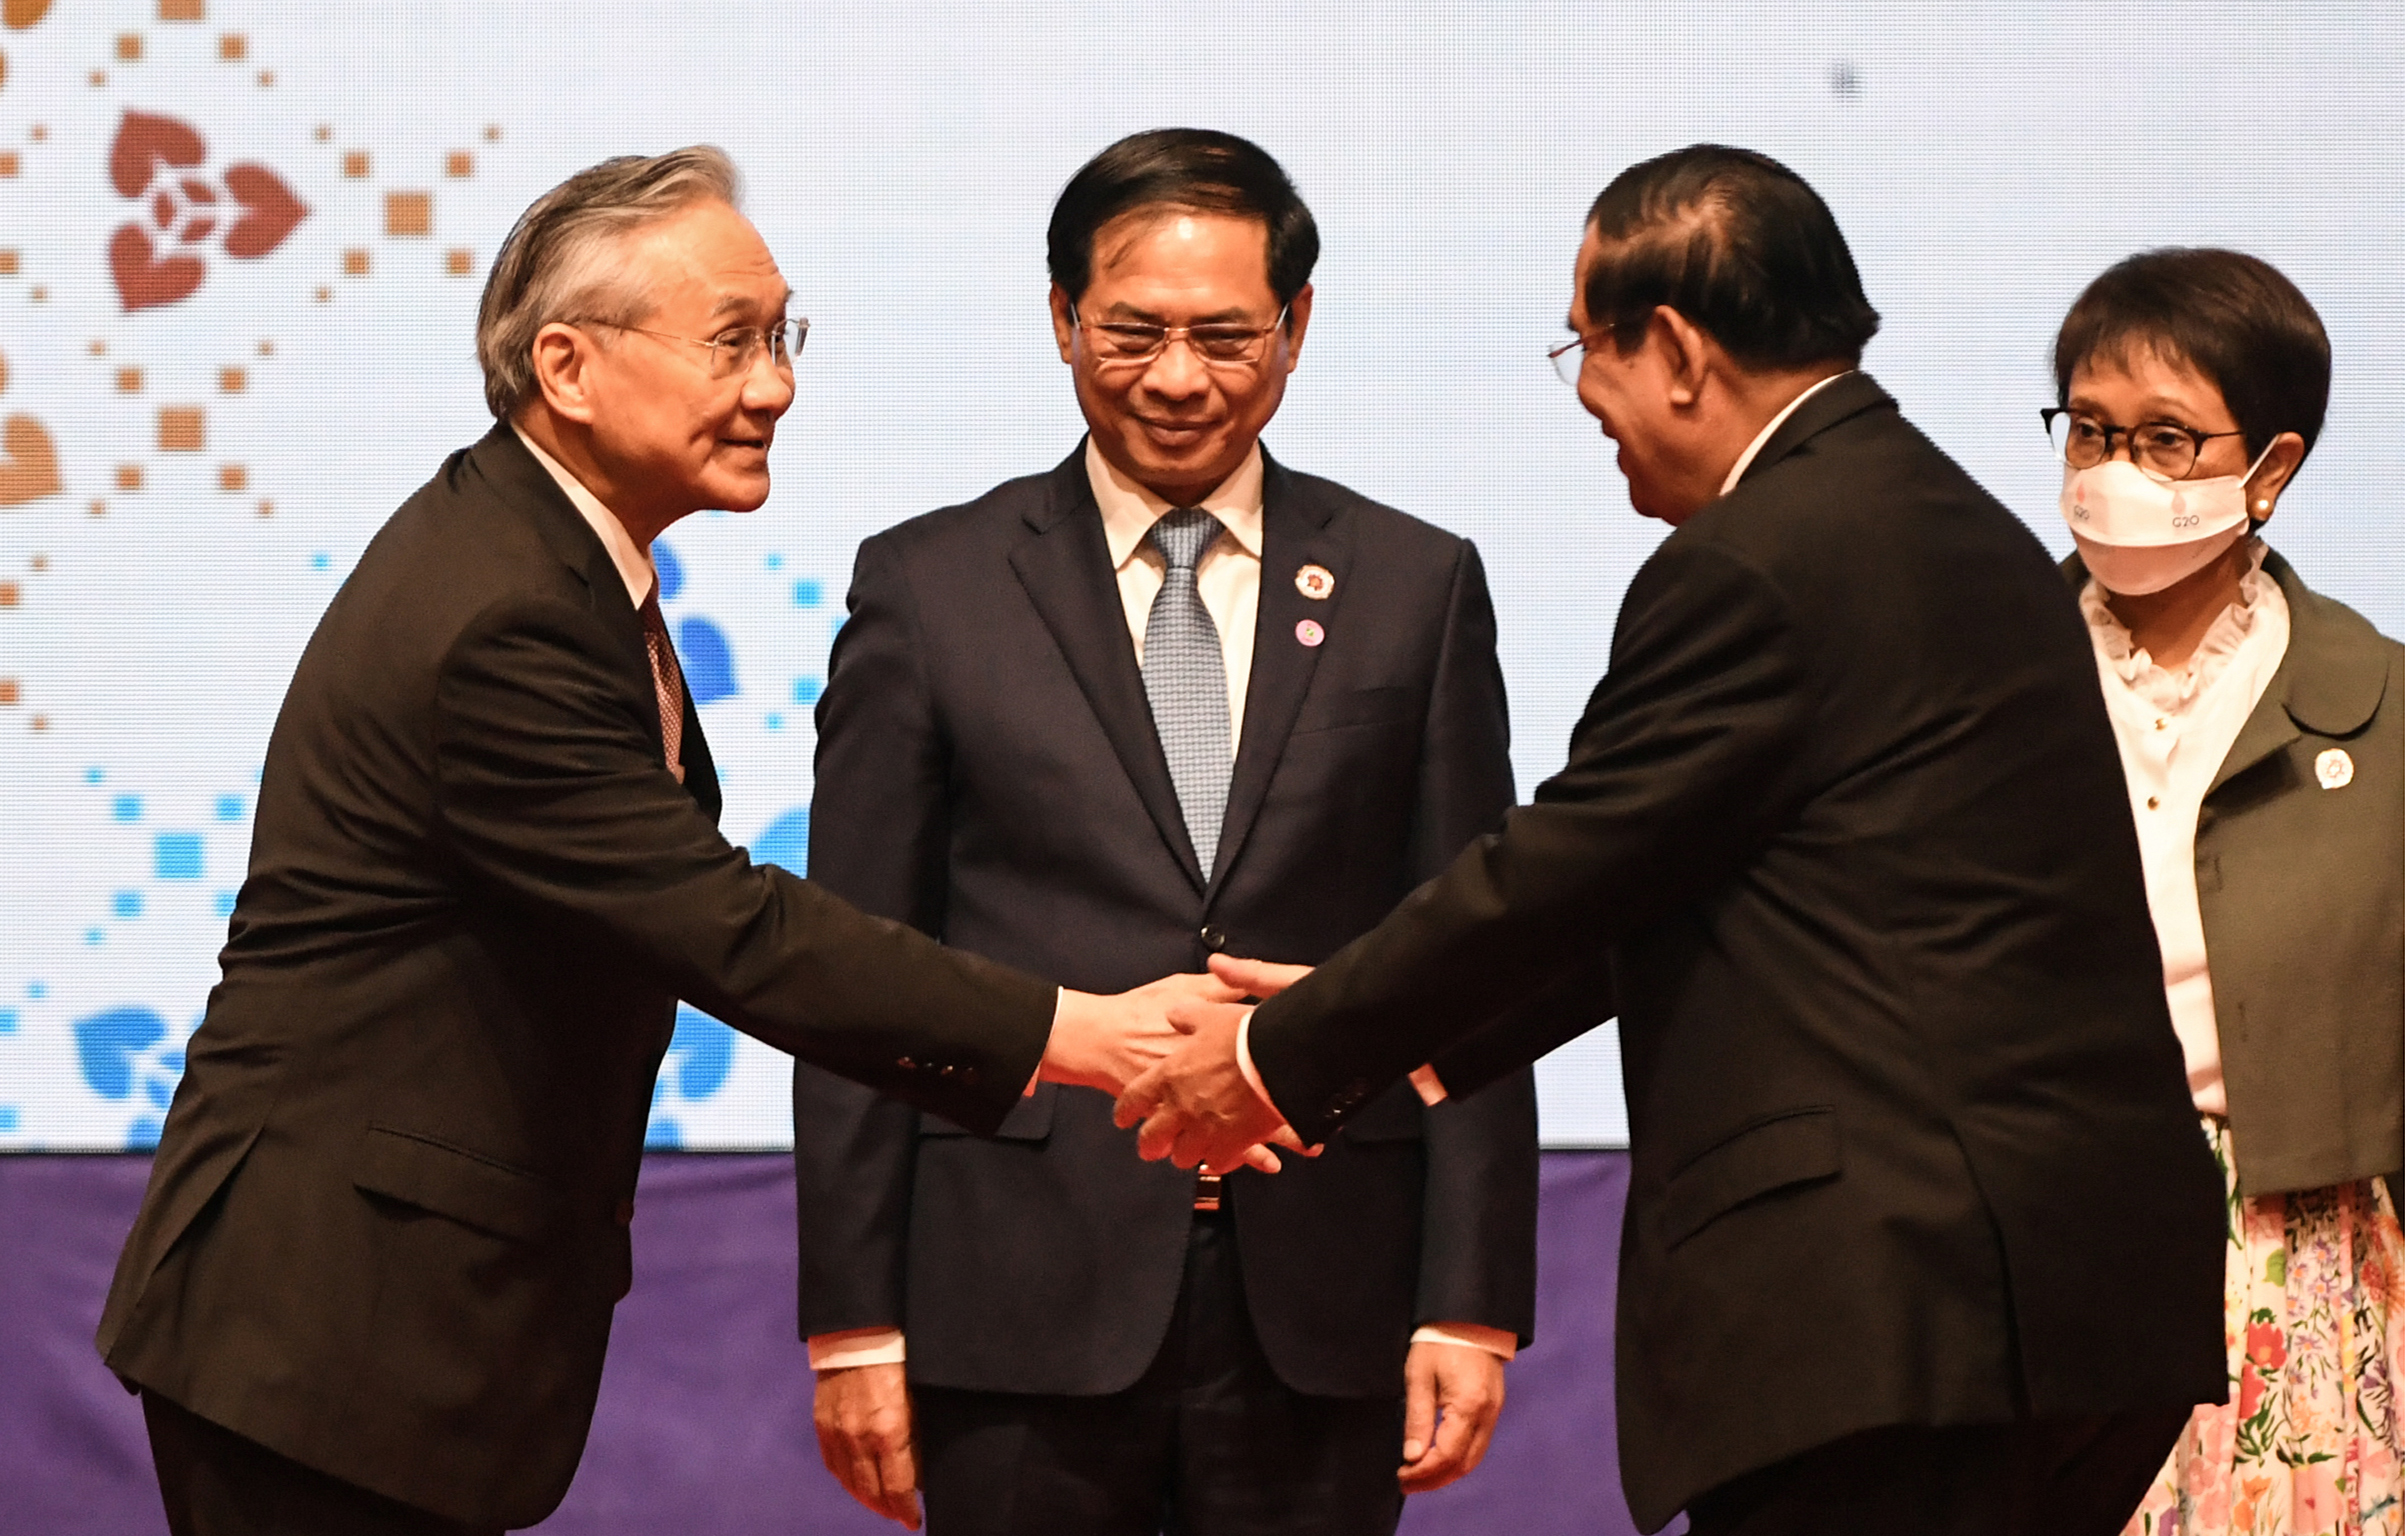 PHNOM PENH: Thailand's Foreign Minister Don Pramudwinai (L) shakes hands with Cambodia's Prime Minister Hun Sen (2R) in front of Vietnam's Foreign Minister Bui Thanh Son (C) and Indonesia's Foreign Minister Retno Marsudi (R) after the opening ceremony for the 55th Association of Southeast Asian Nations (ASEAN) Foreign Ministers Meeting in Phnom Penh. – AFP